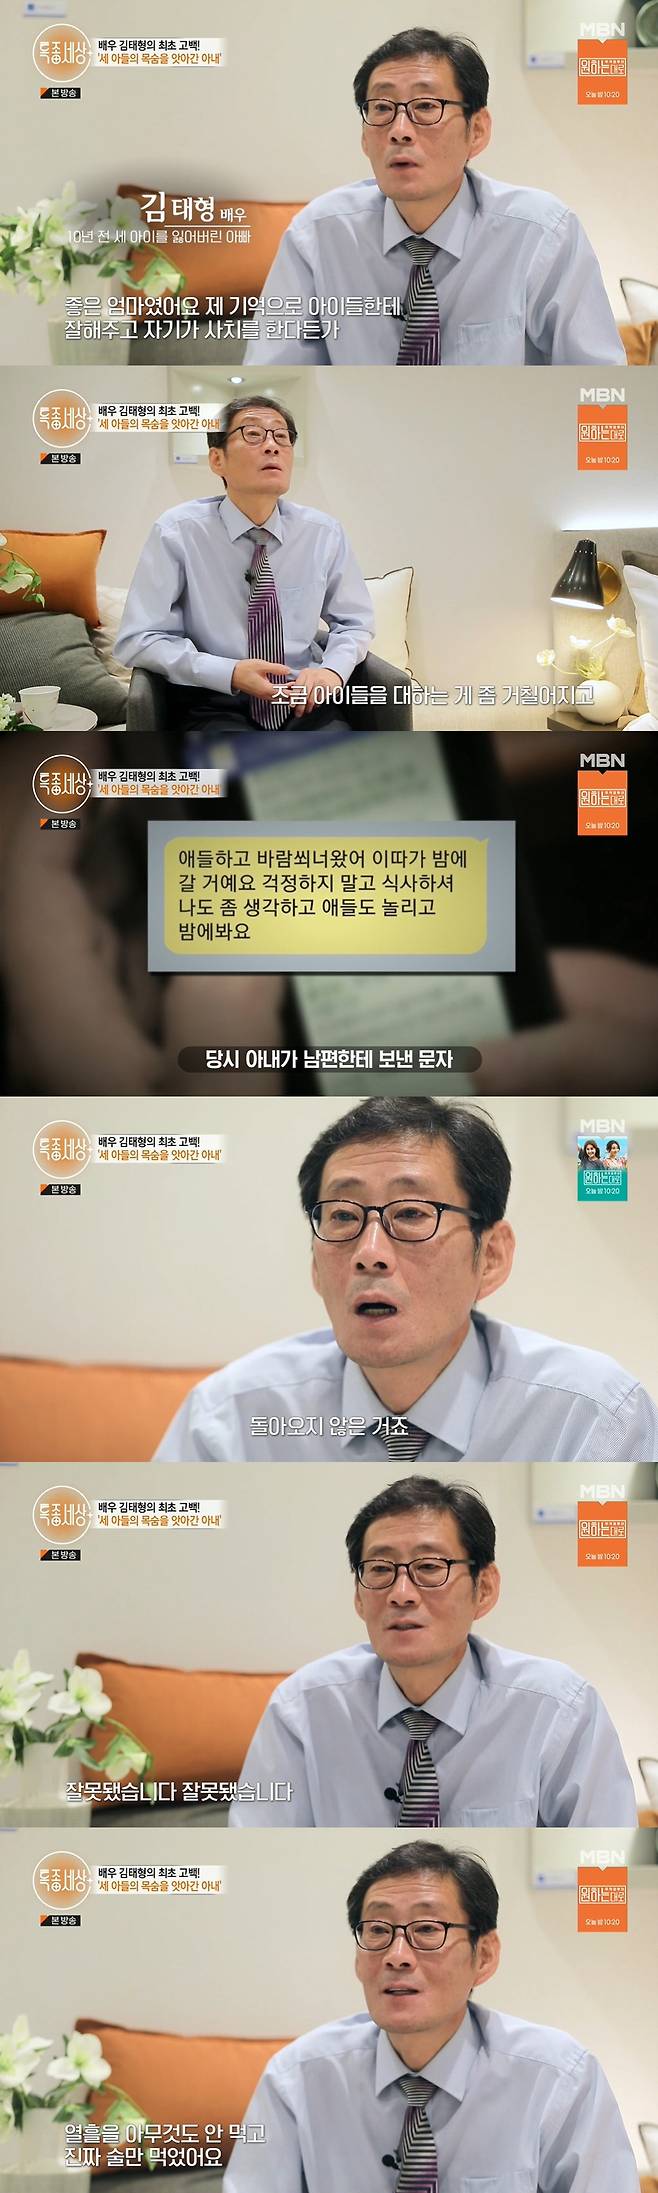 Actor Kim Tae-hyung, who lost three children 10 years ago, shed tears at the thought of children.MBN Special World broadcast on the 22nd, the first Confessions of actor Kim Tae-hyung, who lost three children 10 years ago, were drawn.In 2012, a report said that the mother had killed three sons. Father of the victim was Kim Tae-hyung, a middle-aged actor.In the memory of the day that is hard to erase for 10 years, Kim Tae-hyung said, I am panicked when I am, my body is Memory.I have to live hard. I can not meet children if I go to hell. Kim Tae-hyung was currently working as the youngest employee at the apartment sales office.Kim Tae-hyung said, I did not quit acting voluntarily, but I had a personal family history, so I avoided people. I was in such a situation. I had a panic disorder and I went to the wrong road every day when I was driving.He said, Seo Young-jin, Young-bum, and Young-gun lost their lives in August 10 years ago and wandered for about three years.Kim Tae-hyung said, It was a good mother. I was good to my children with my memory and I was really good to my children without having to do luxury or anything. At one point, it became rough to treat children.I was annoyed. I thought, Why are you so annoyed?Since then, his wife has left the house without saying anything, leaving a text and losing contact.Kim Tae-hyung said, I will come to the children with some air and take the children out and did not come back.When I could not contact my wife, I reported to the police, and a week later, I asked, What about the children? And said, It was wrong. Kim Tae-hyung said, I can not express.Its just panic. The soul is out. It took exactly 10 days from the day the children went out with their mother to the day they found and buried.I did not eat anything for 10 days and drank only. He said, Even if I did not make an extreme choice myself, I would just go if I drank another two days.I just thought about ending it and I thought about it. 